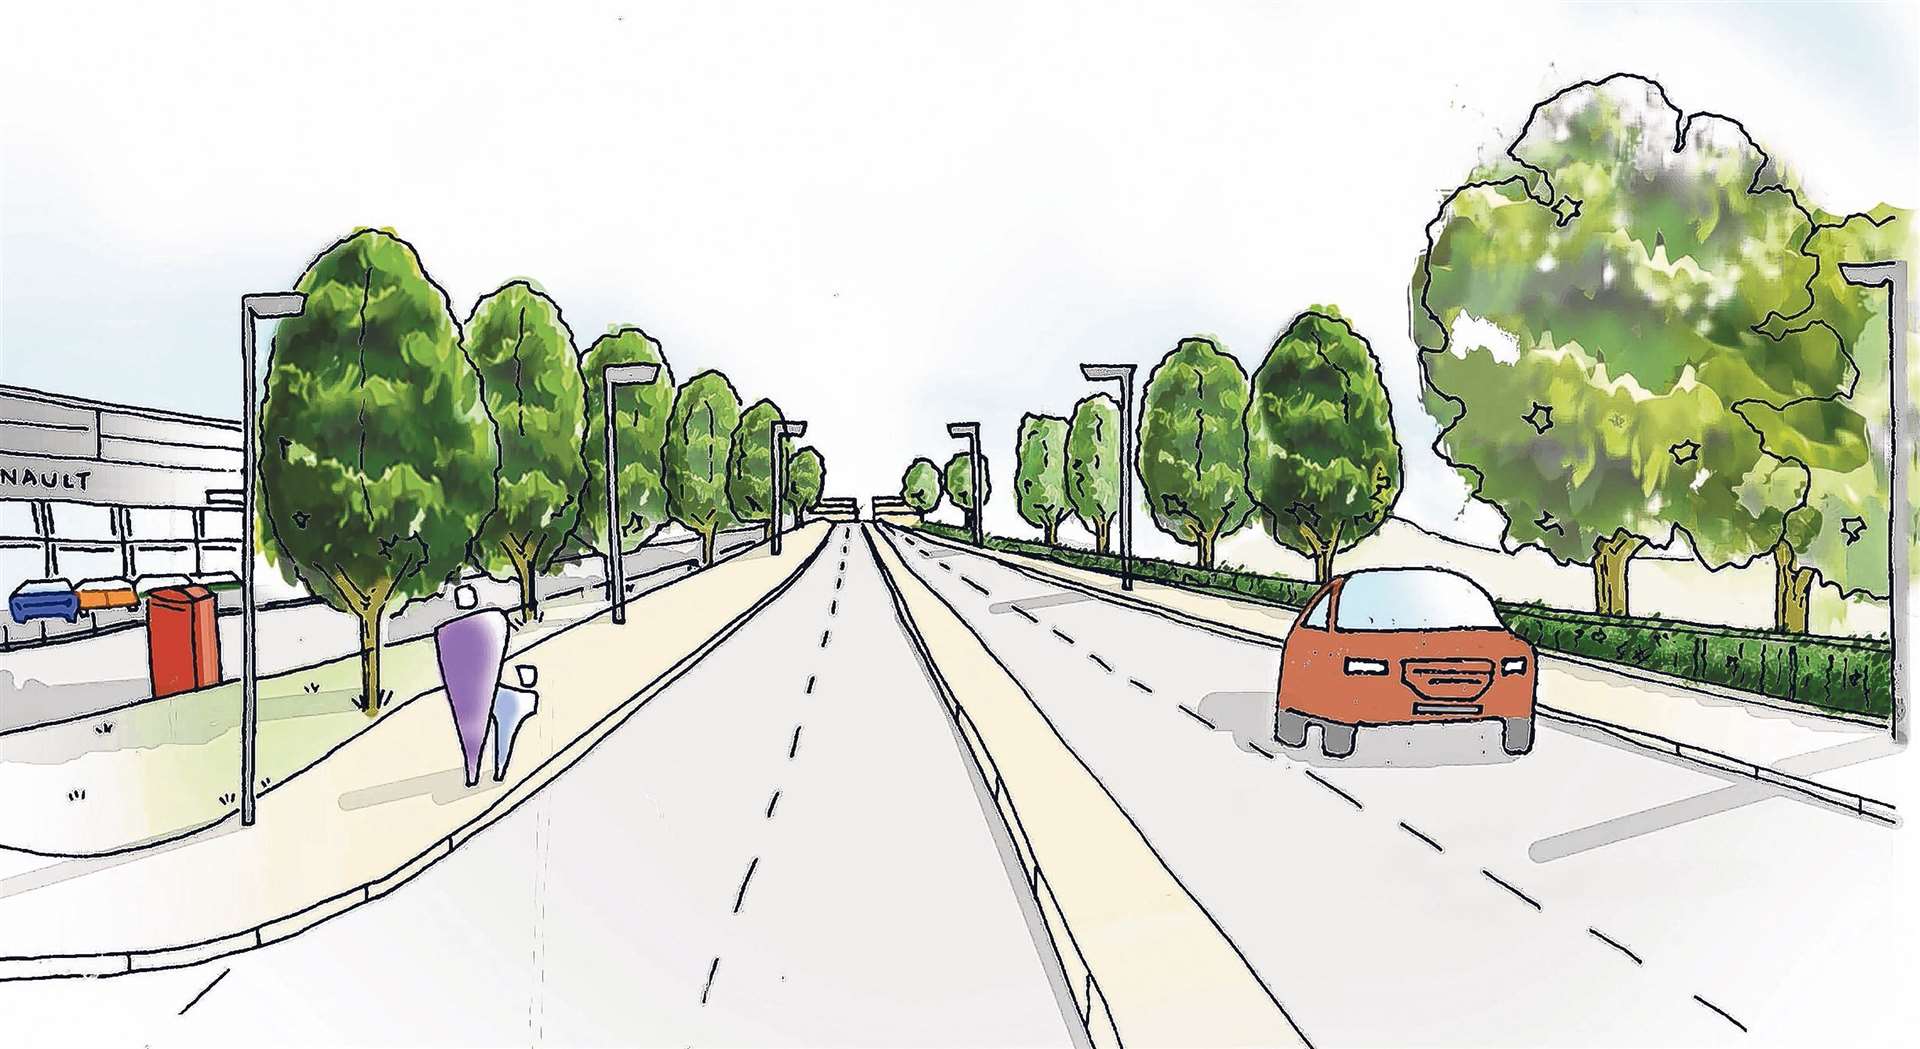 An artist’s impression of the proposed Chart Road dual carriageway scheme